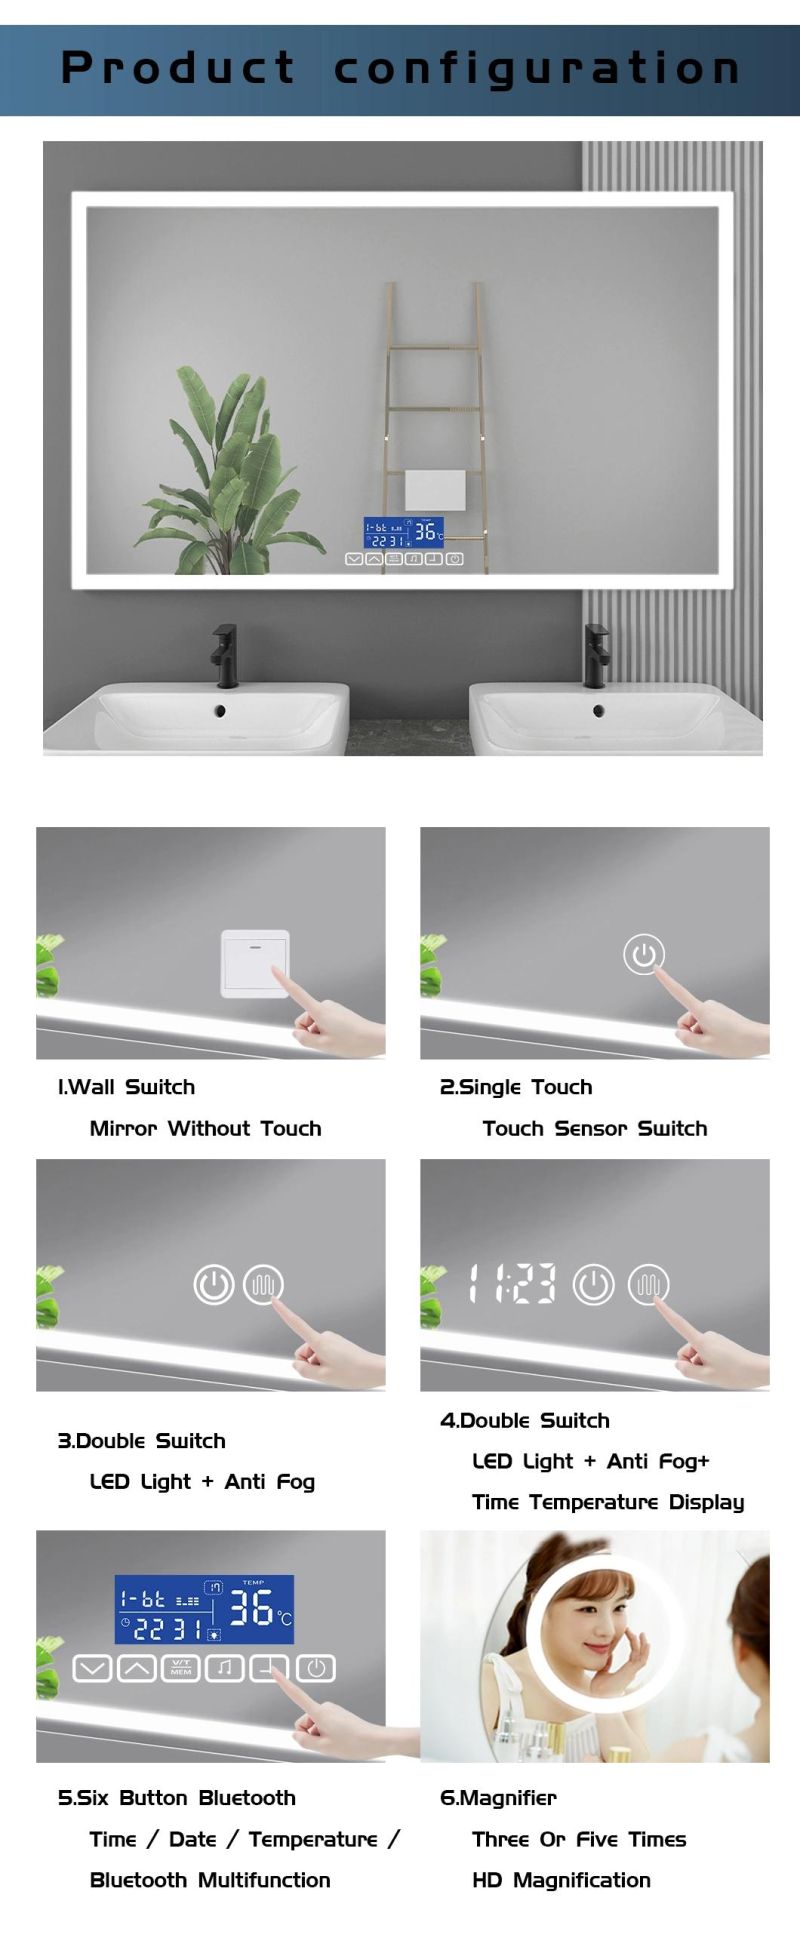 Factory Smart Screen LED Lighted Bathroom Touch Screen Smart Mirror Glass WiFi Magic Mirror for Bathroom Using